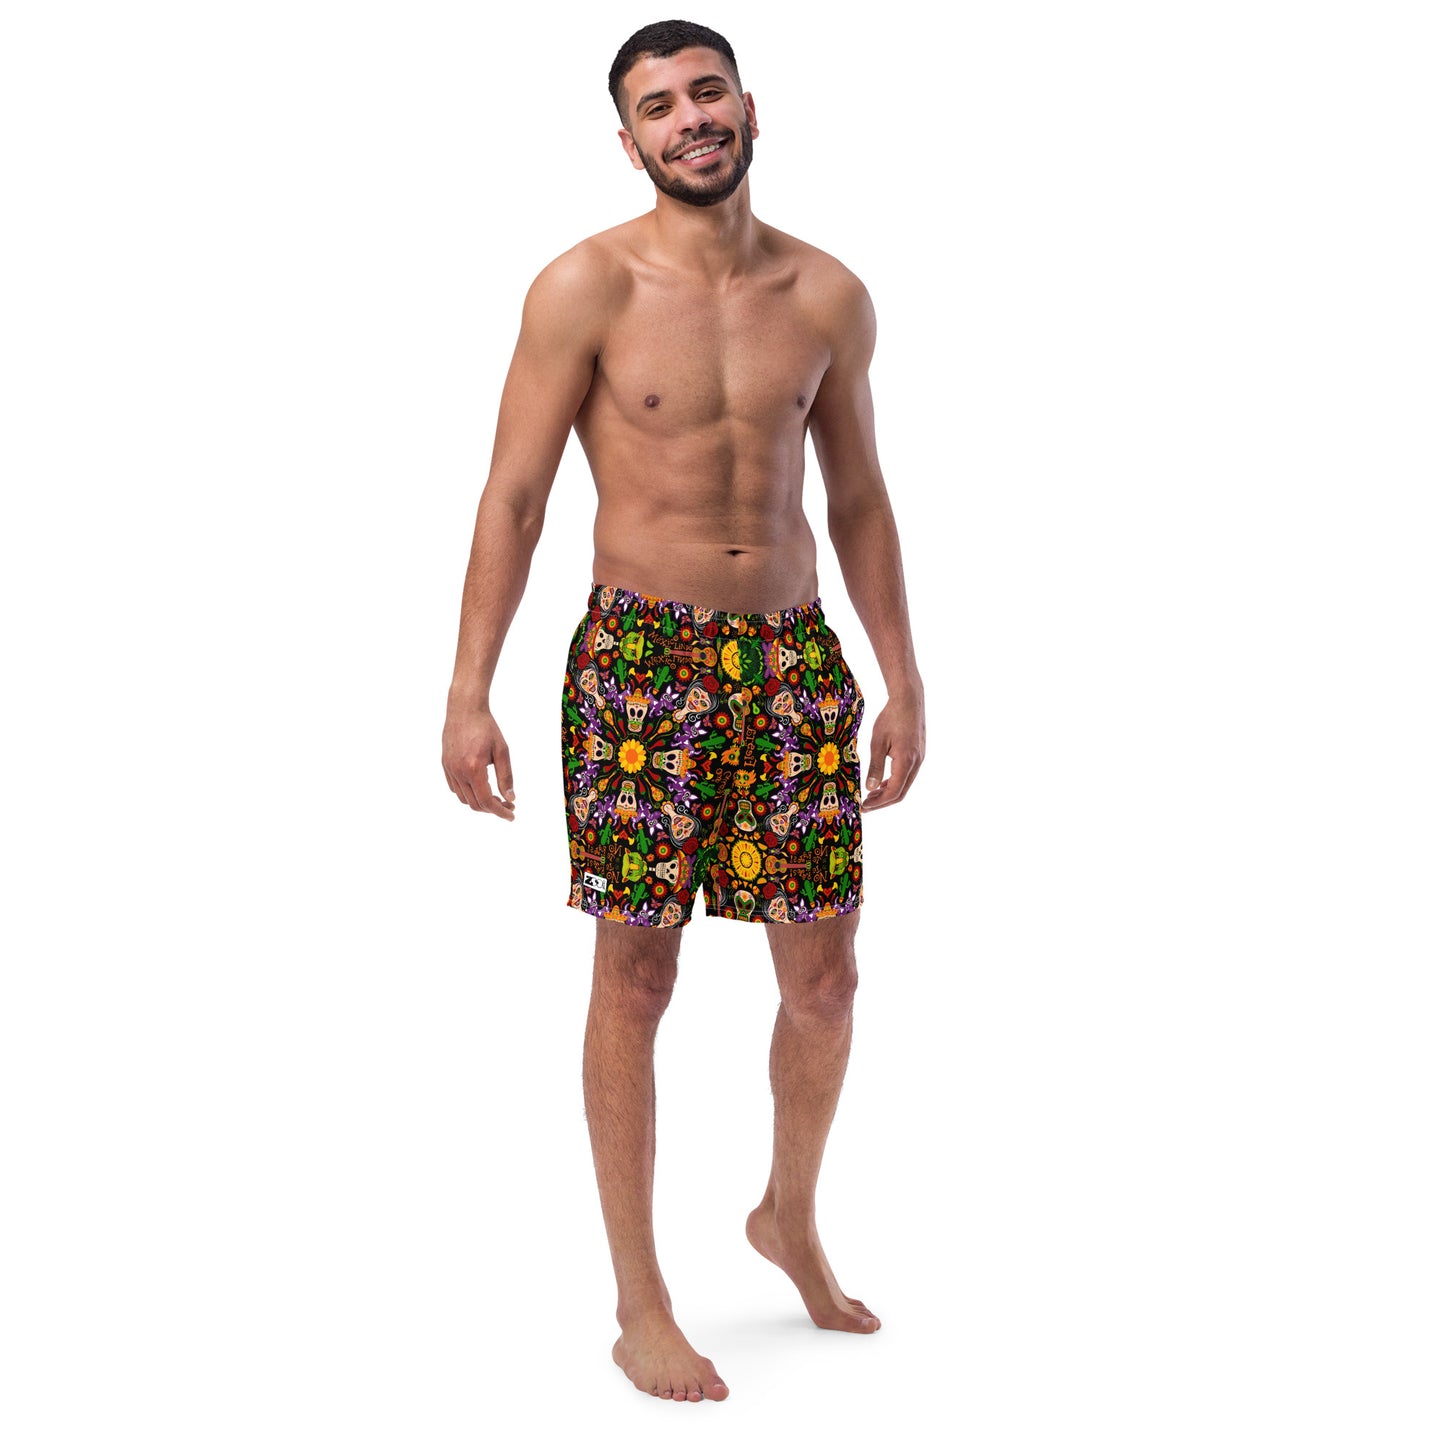 Smiling man wearing Swim Trunks All-over printed with Mexican skulls celebrating the Day of the dead